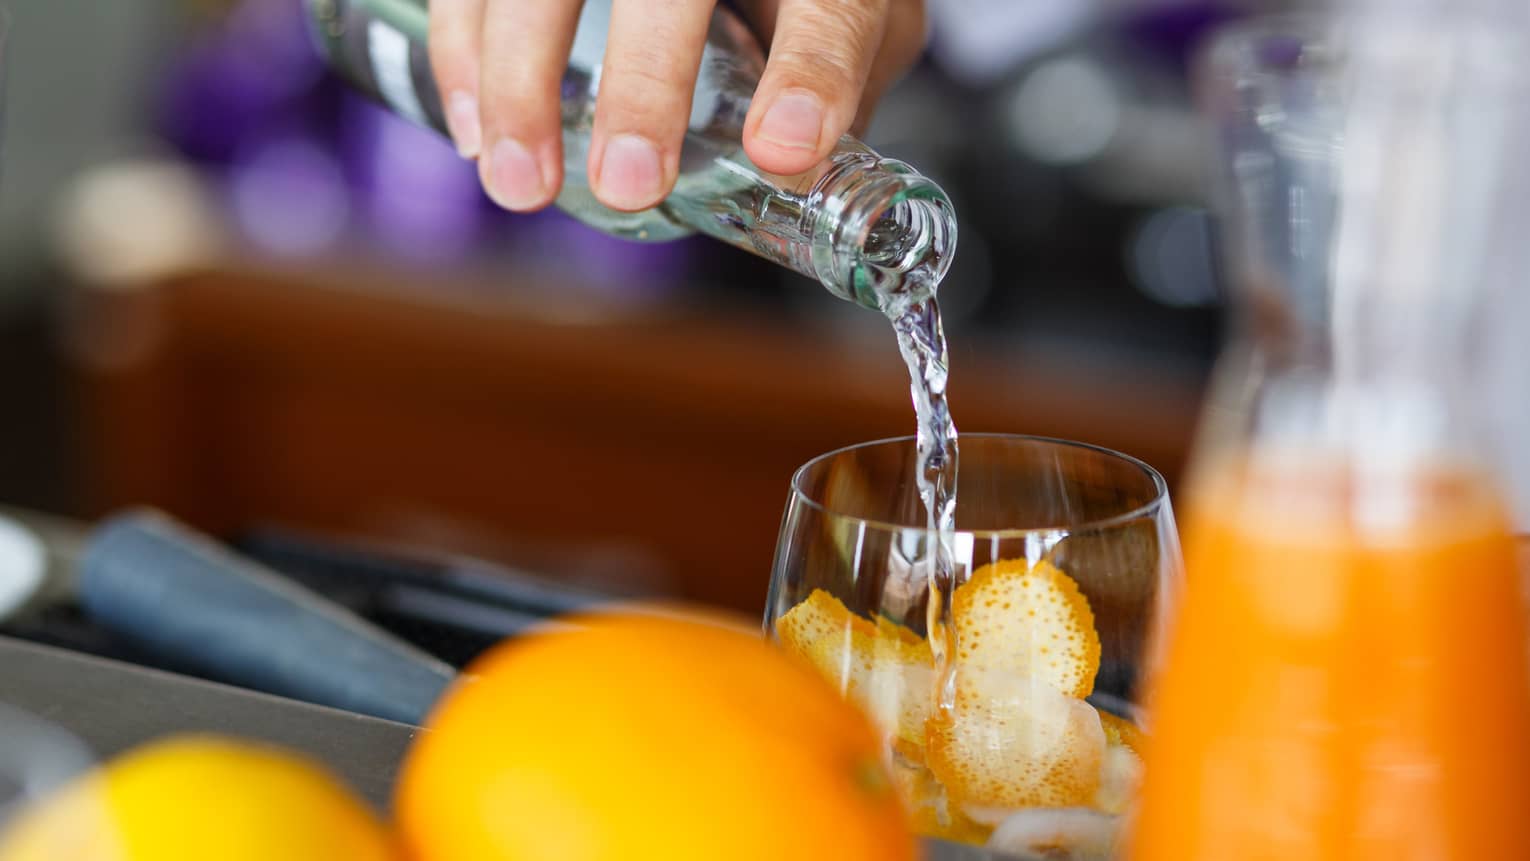 A hand pours clear liquid from a bottle into a glass filled with orange rind; in the foreground, whole oranges and a carafe.